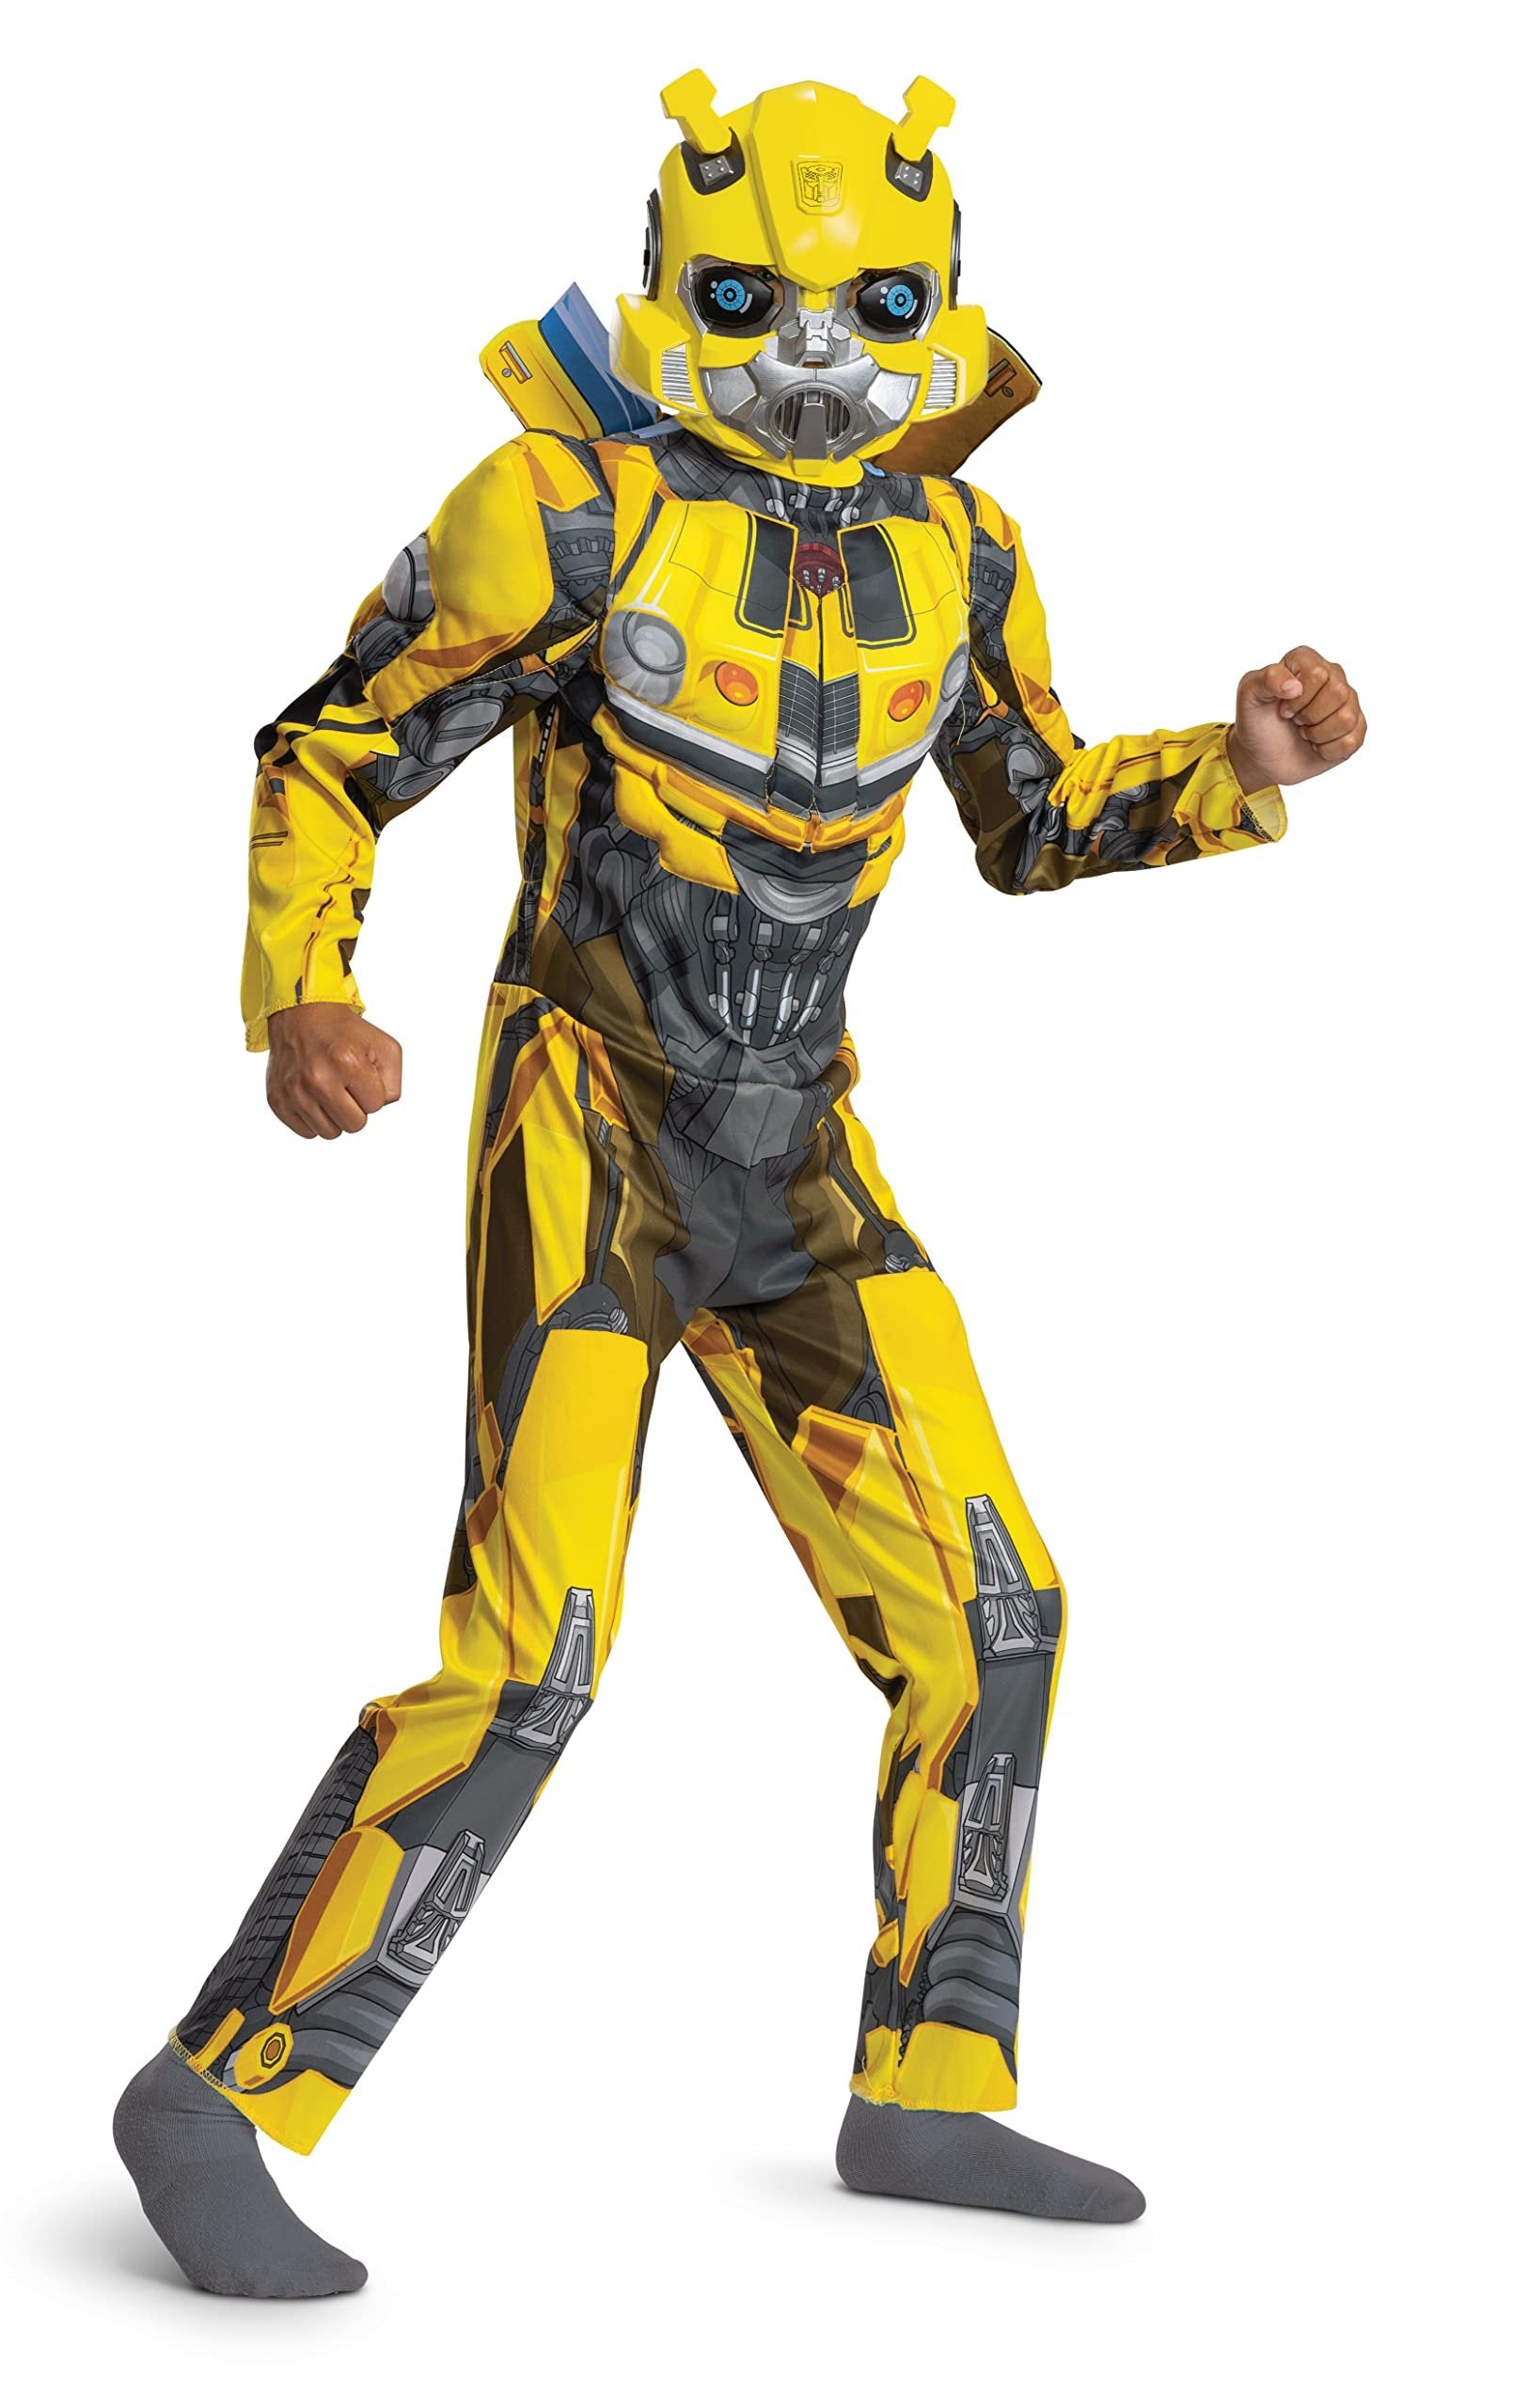 Disguise Bumblebee Muscle Costume for Kids, Official Transformers Rise of the Beasts Padded Costume and Mask, Size (10-12)